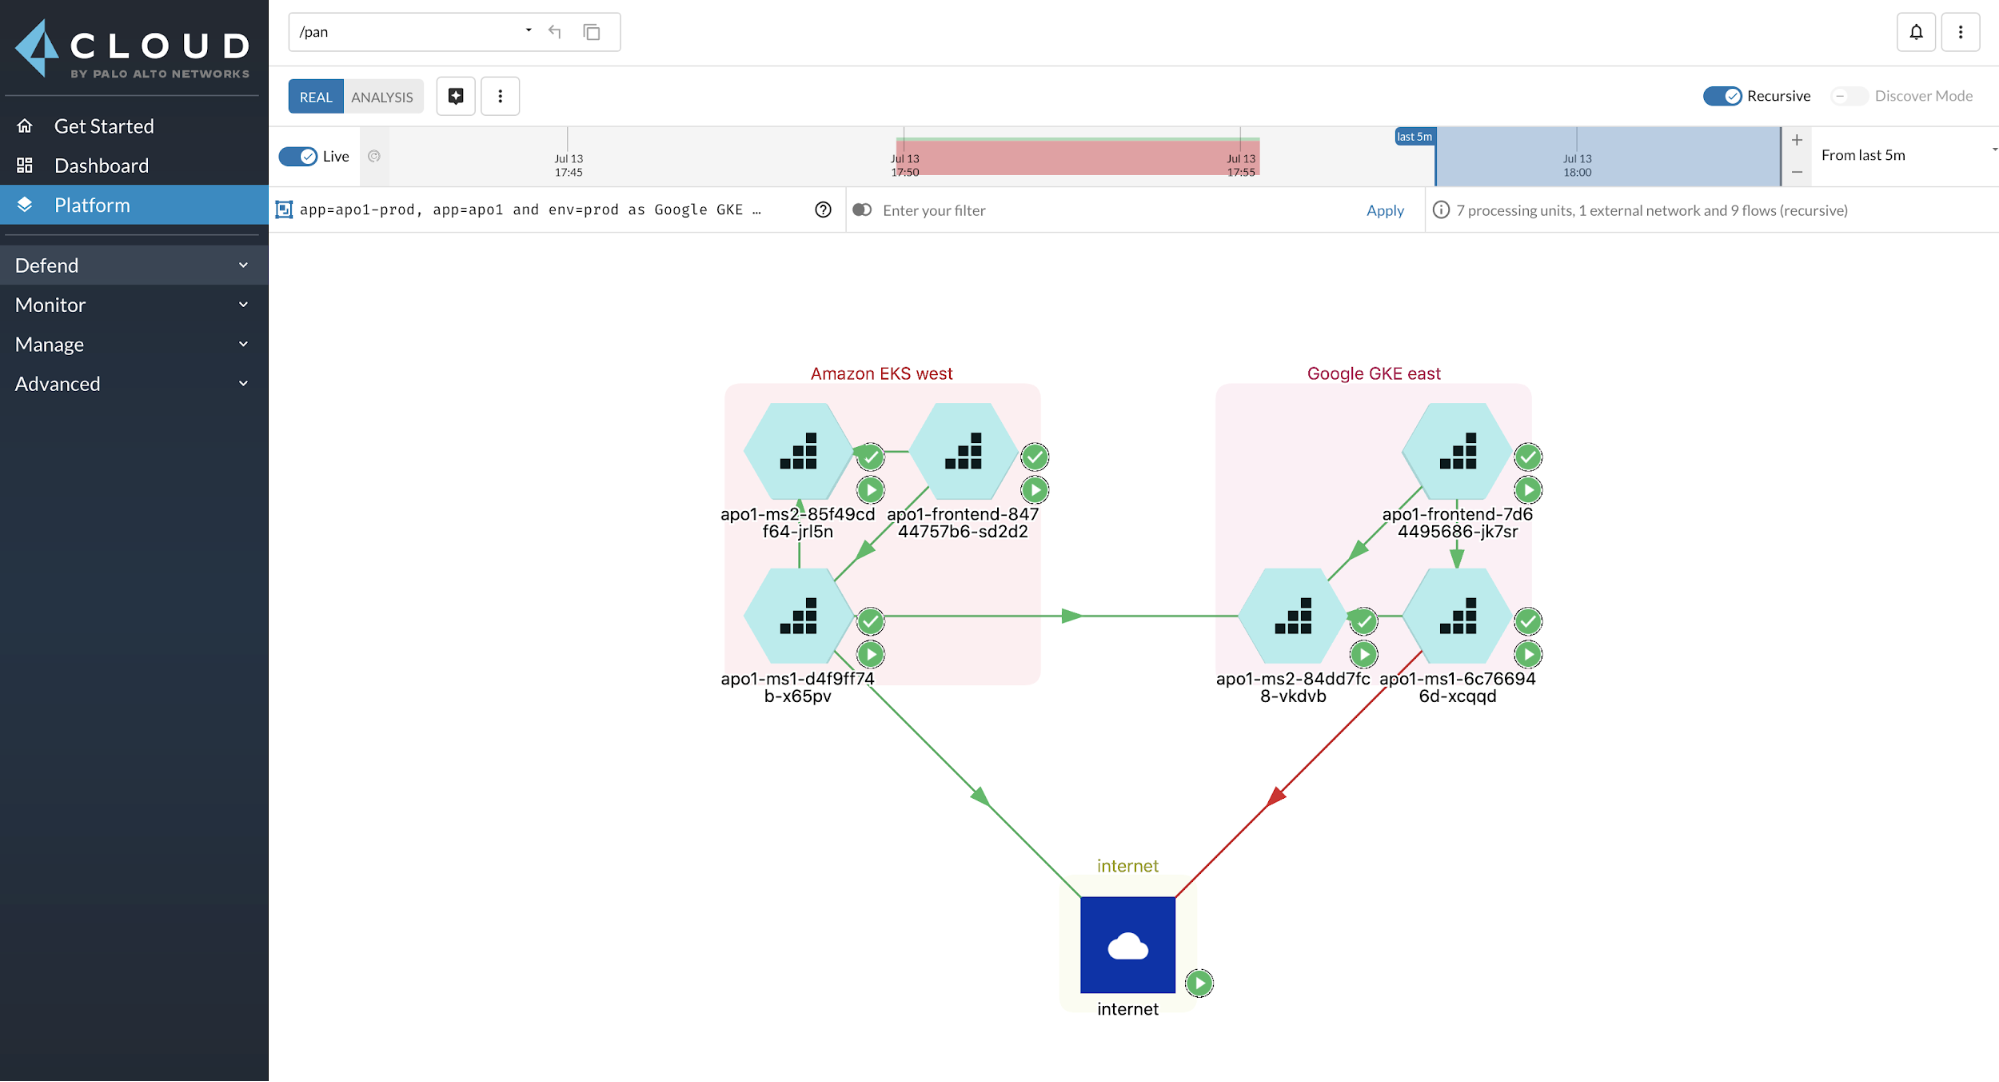 This screenshot shows an example of managing identity-based microsegmentation in Prisma Cloud 2.0. In this case, the image tracks connections and separations between information stored in two different public clouds. 